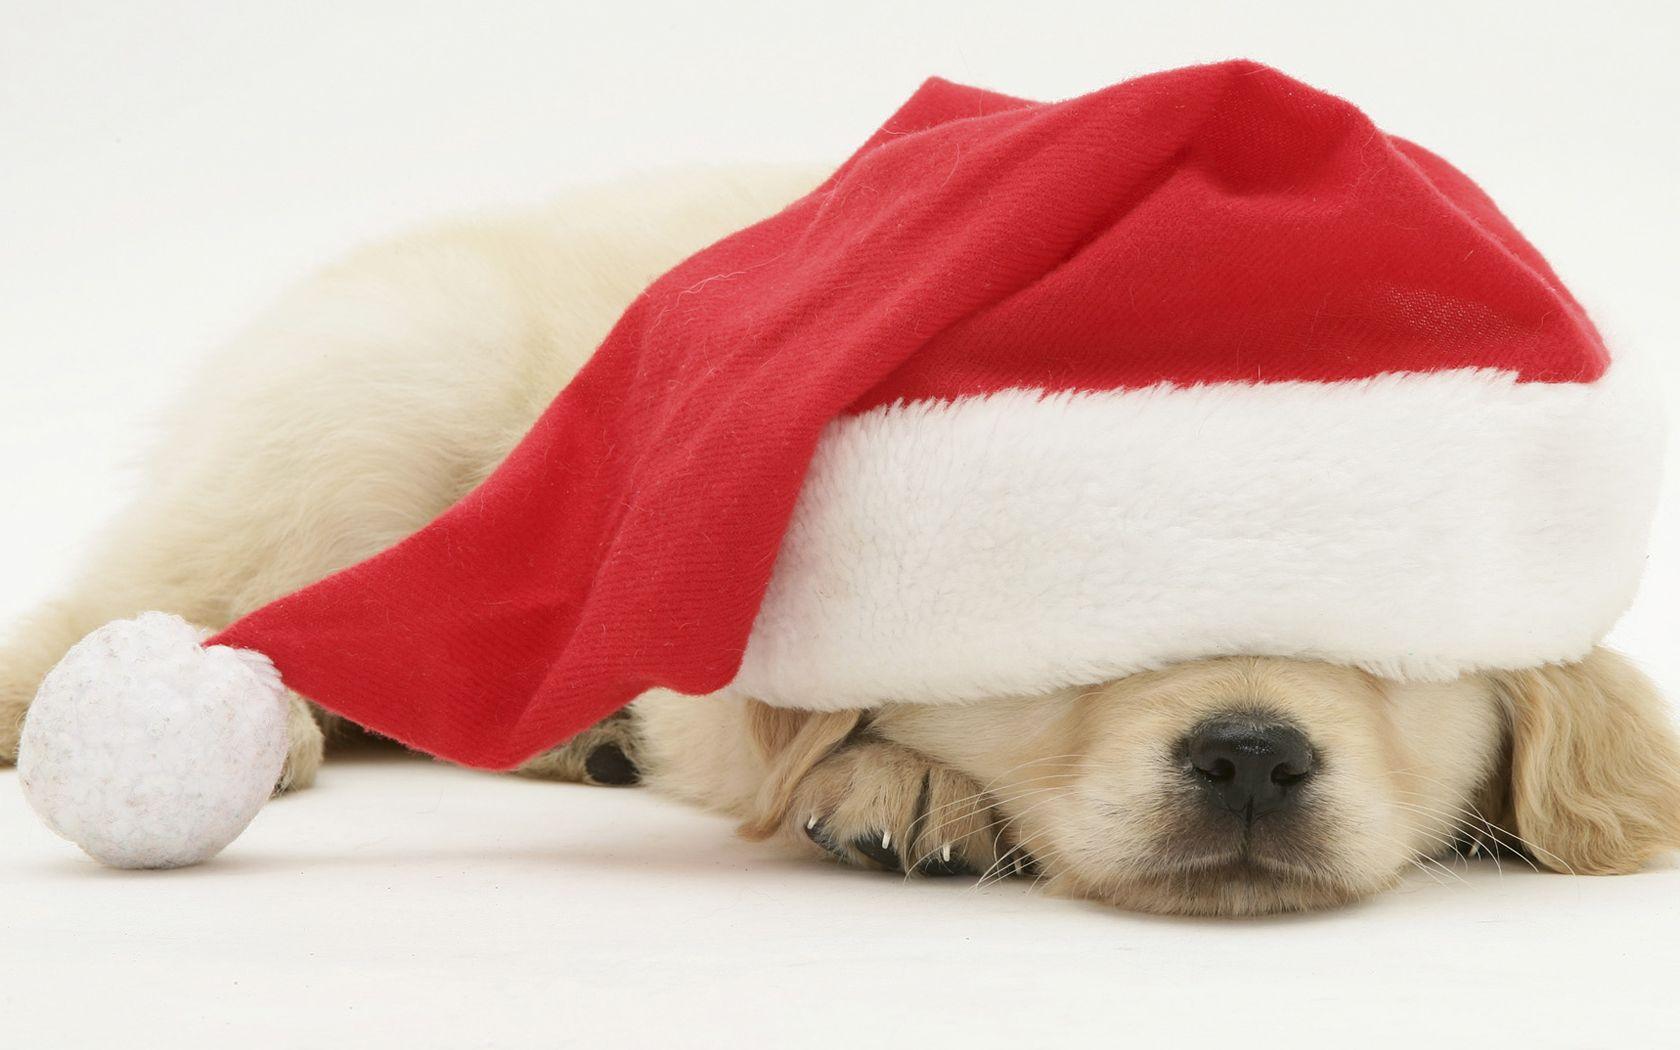 Christmas puppy sleeping in a Santa hat. Christmas Dogs